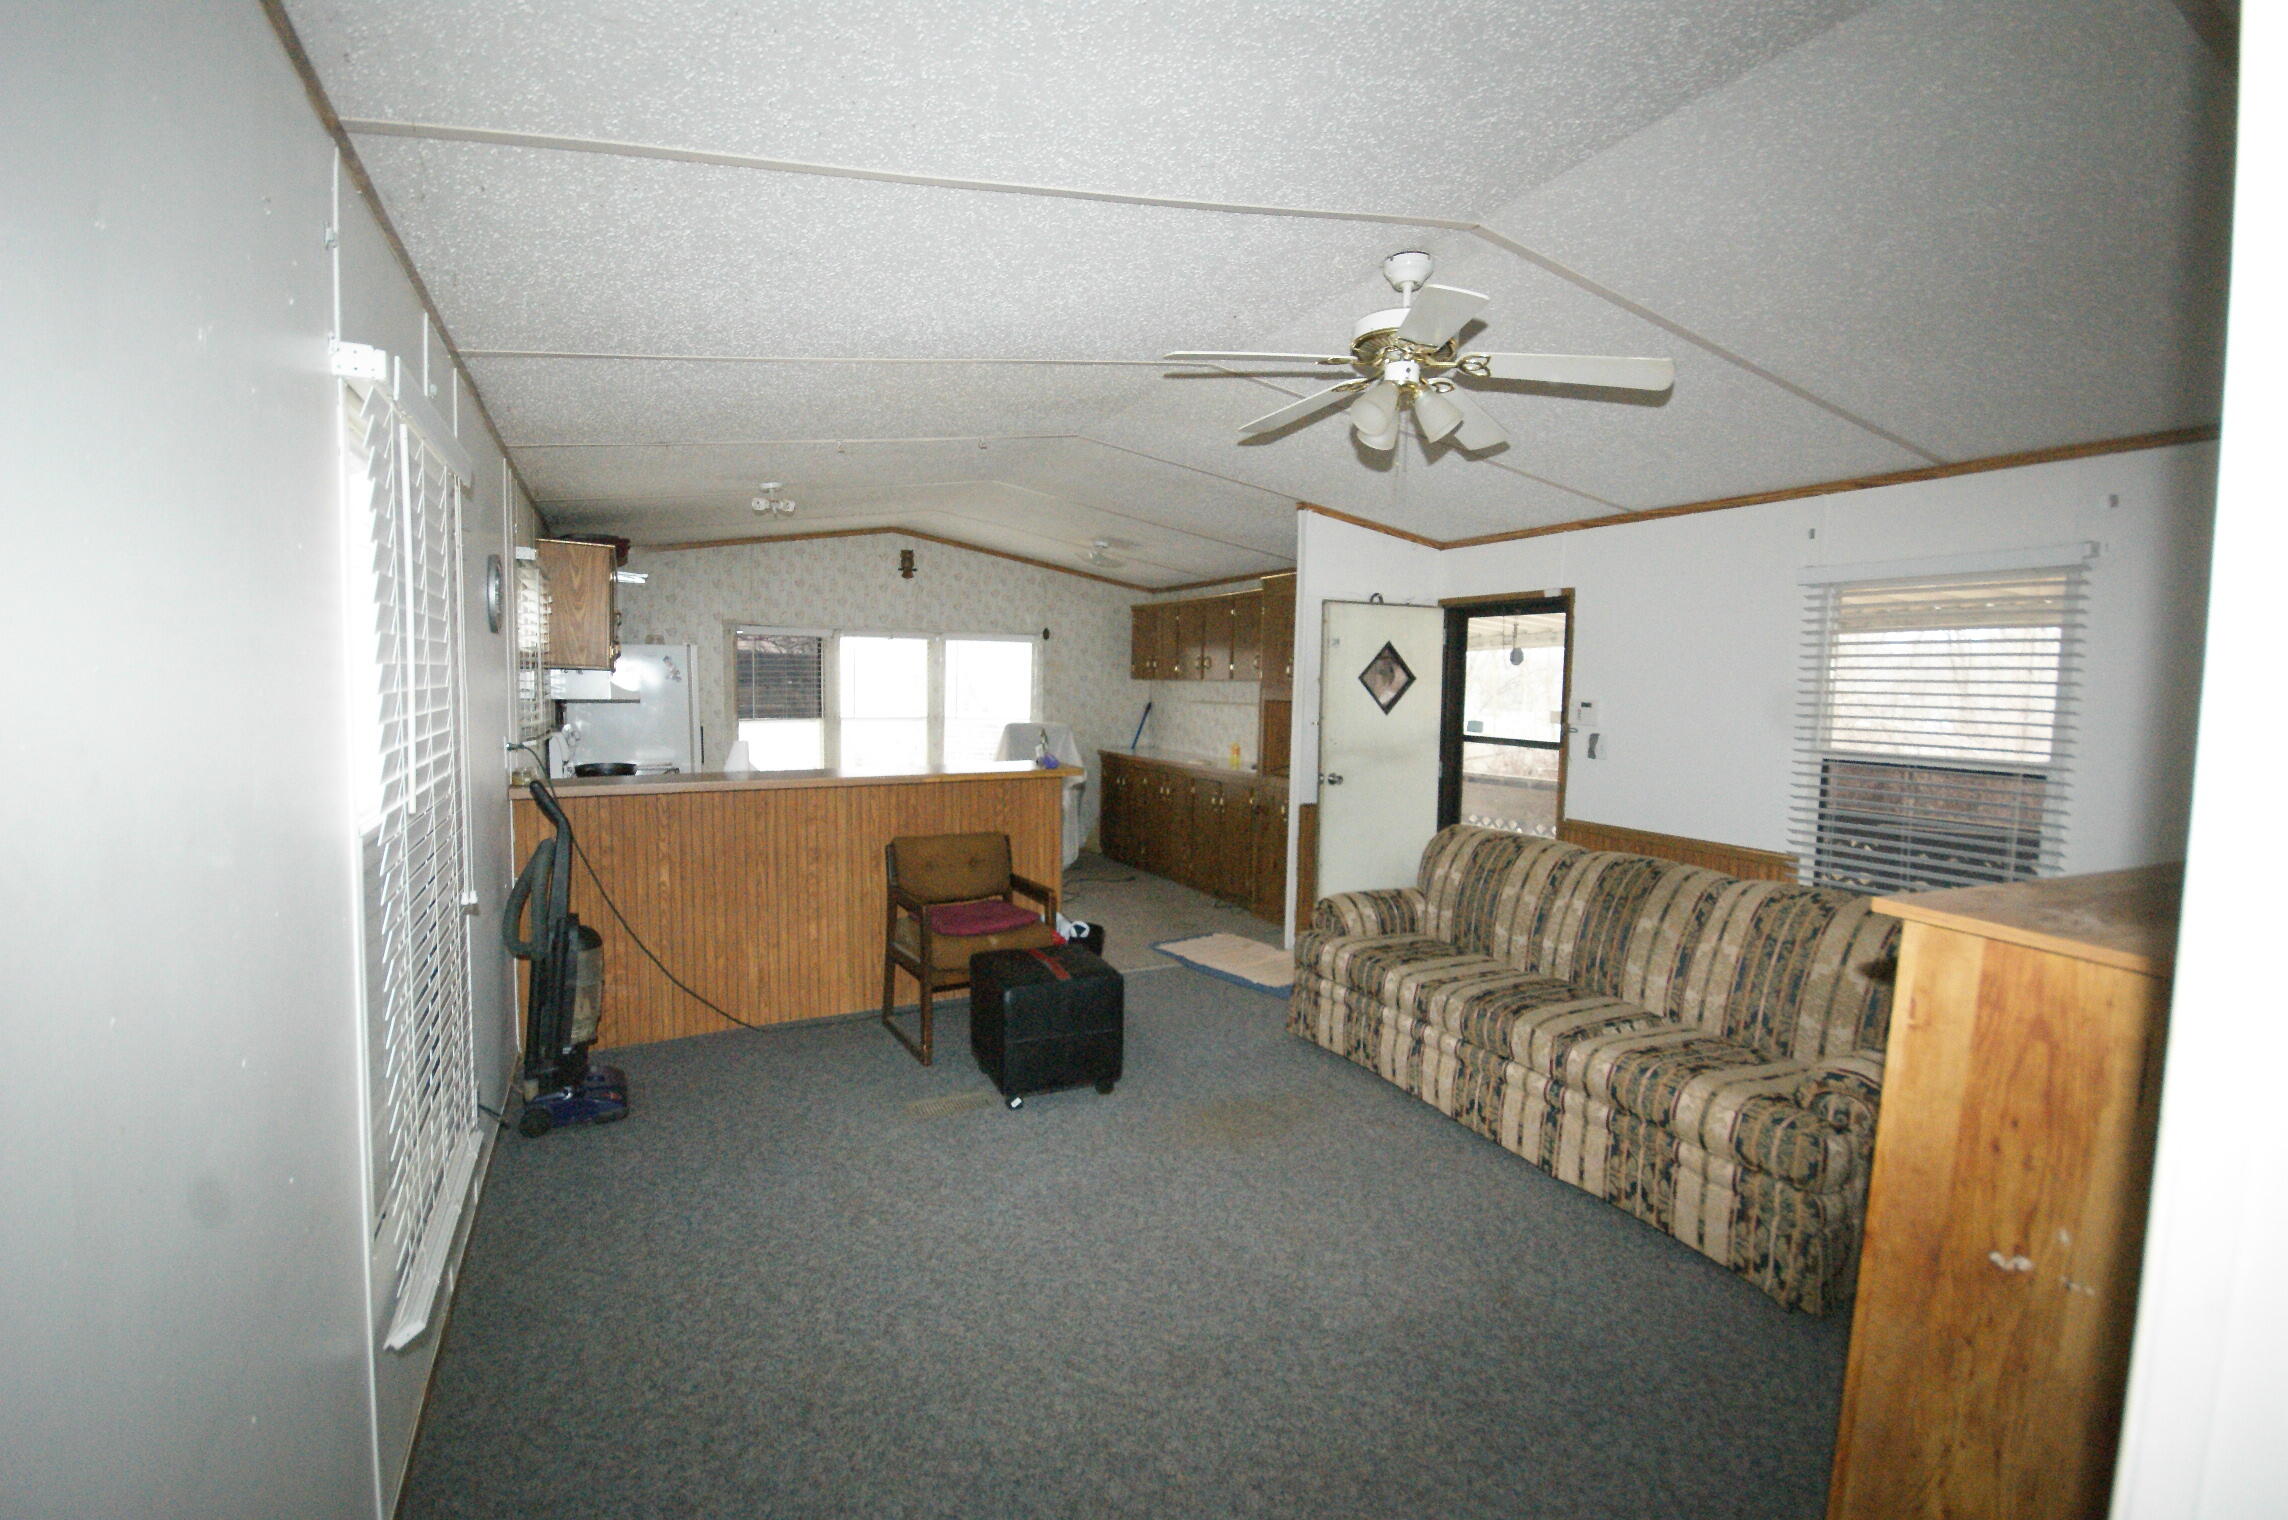 Photo 12 of 12 of 630 5th Street mobile home